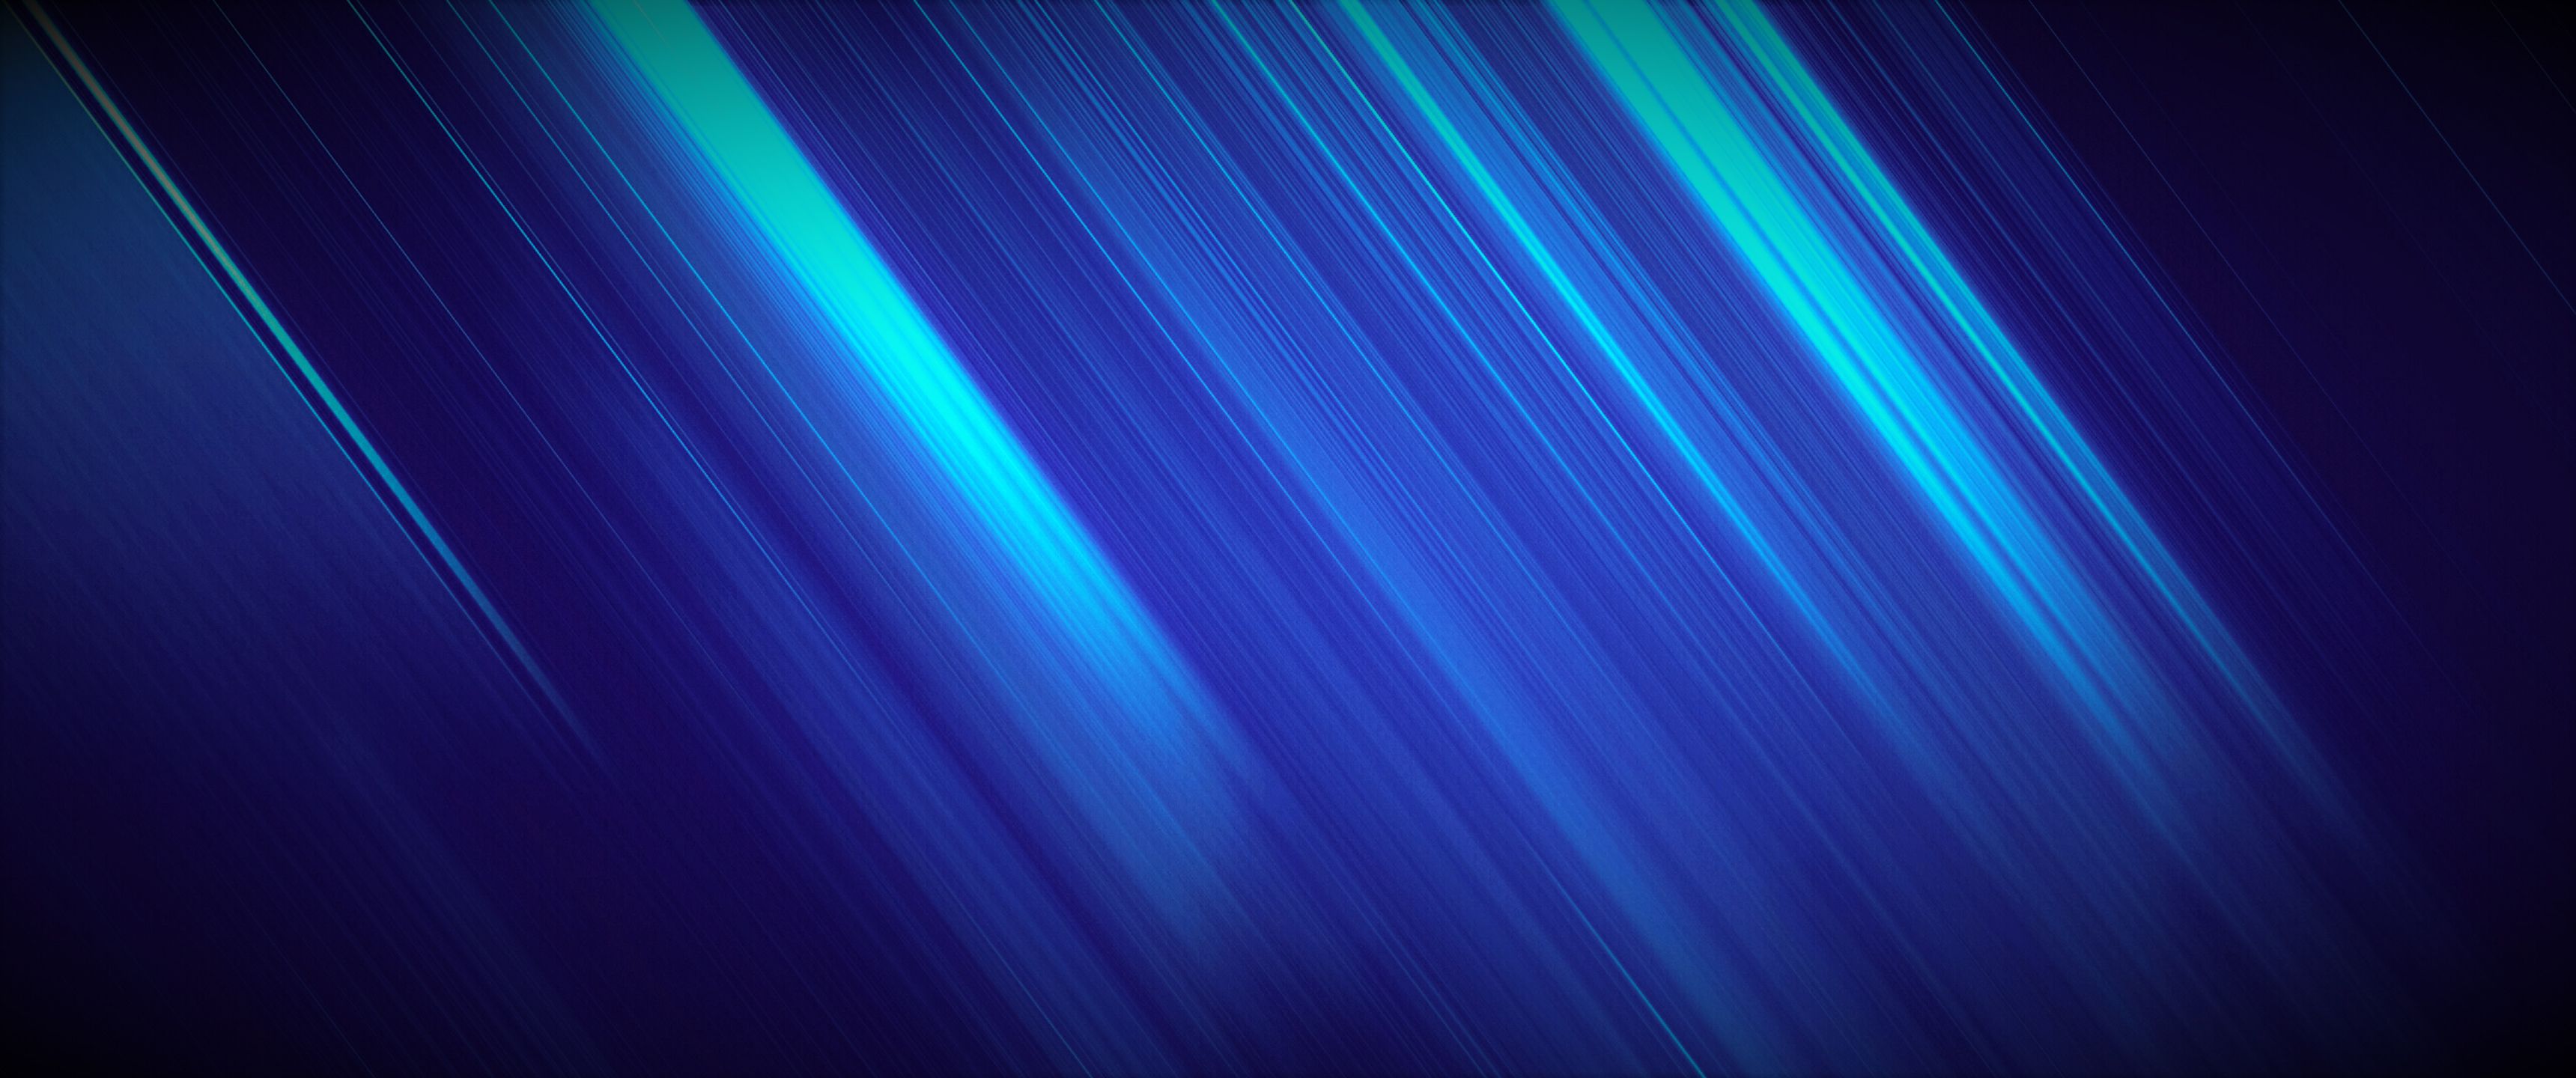 Blue Lines Abstract Digital Art 4k, HD Abstract, 4k Wallpaper, Image, Background, Photo and Picture